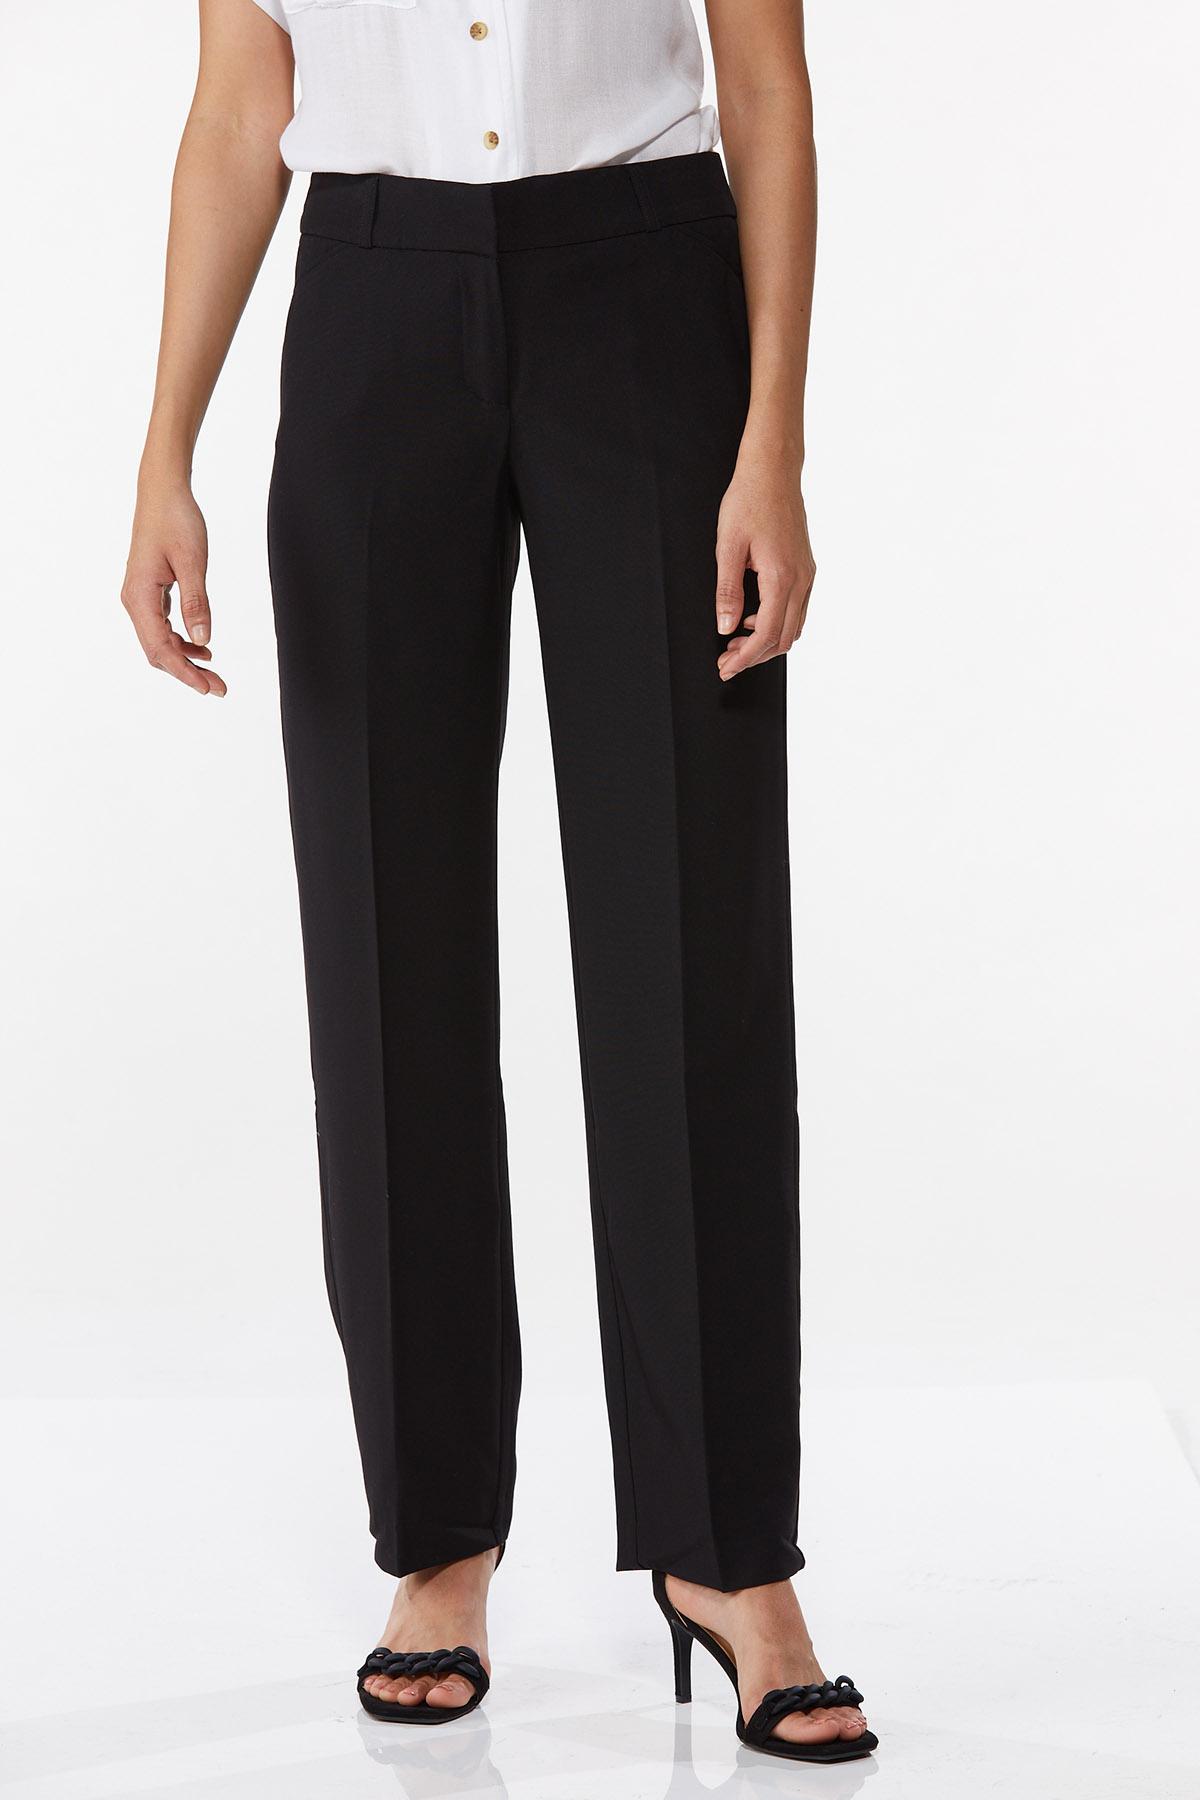 Cato Fashions  Cato Solid Trouser Pants